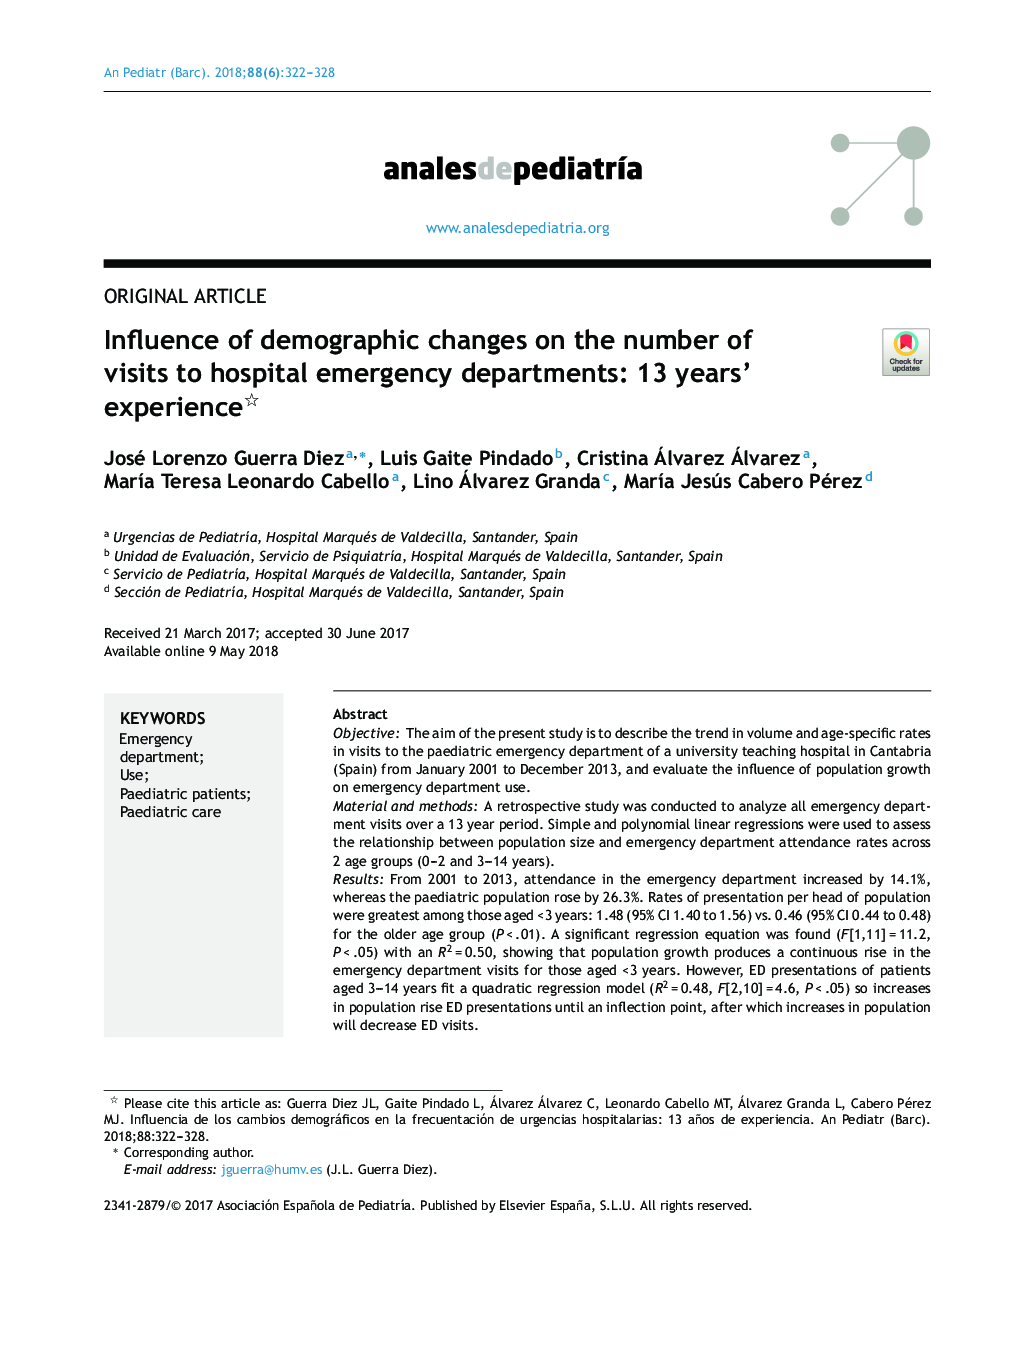 Influence of demographic changes on the number of visits to hospital emergency departments: 13 years' experience